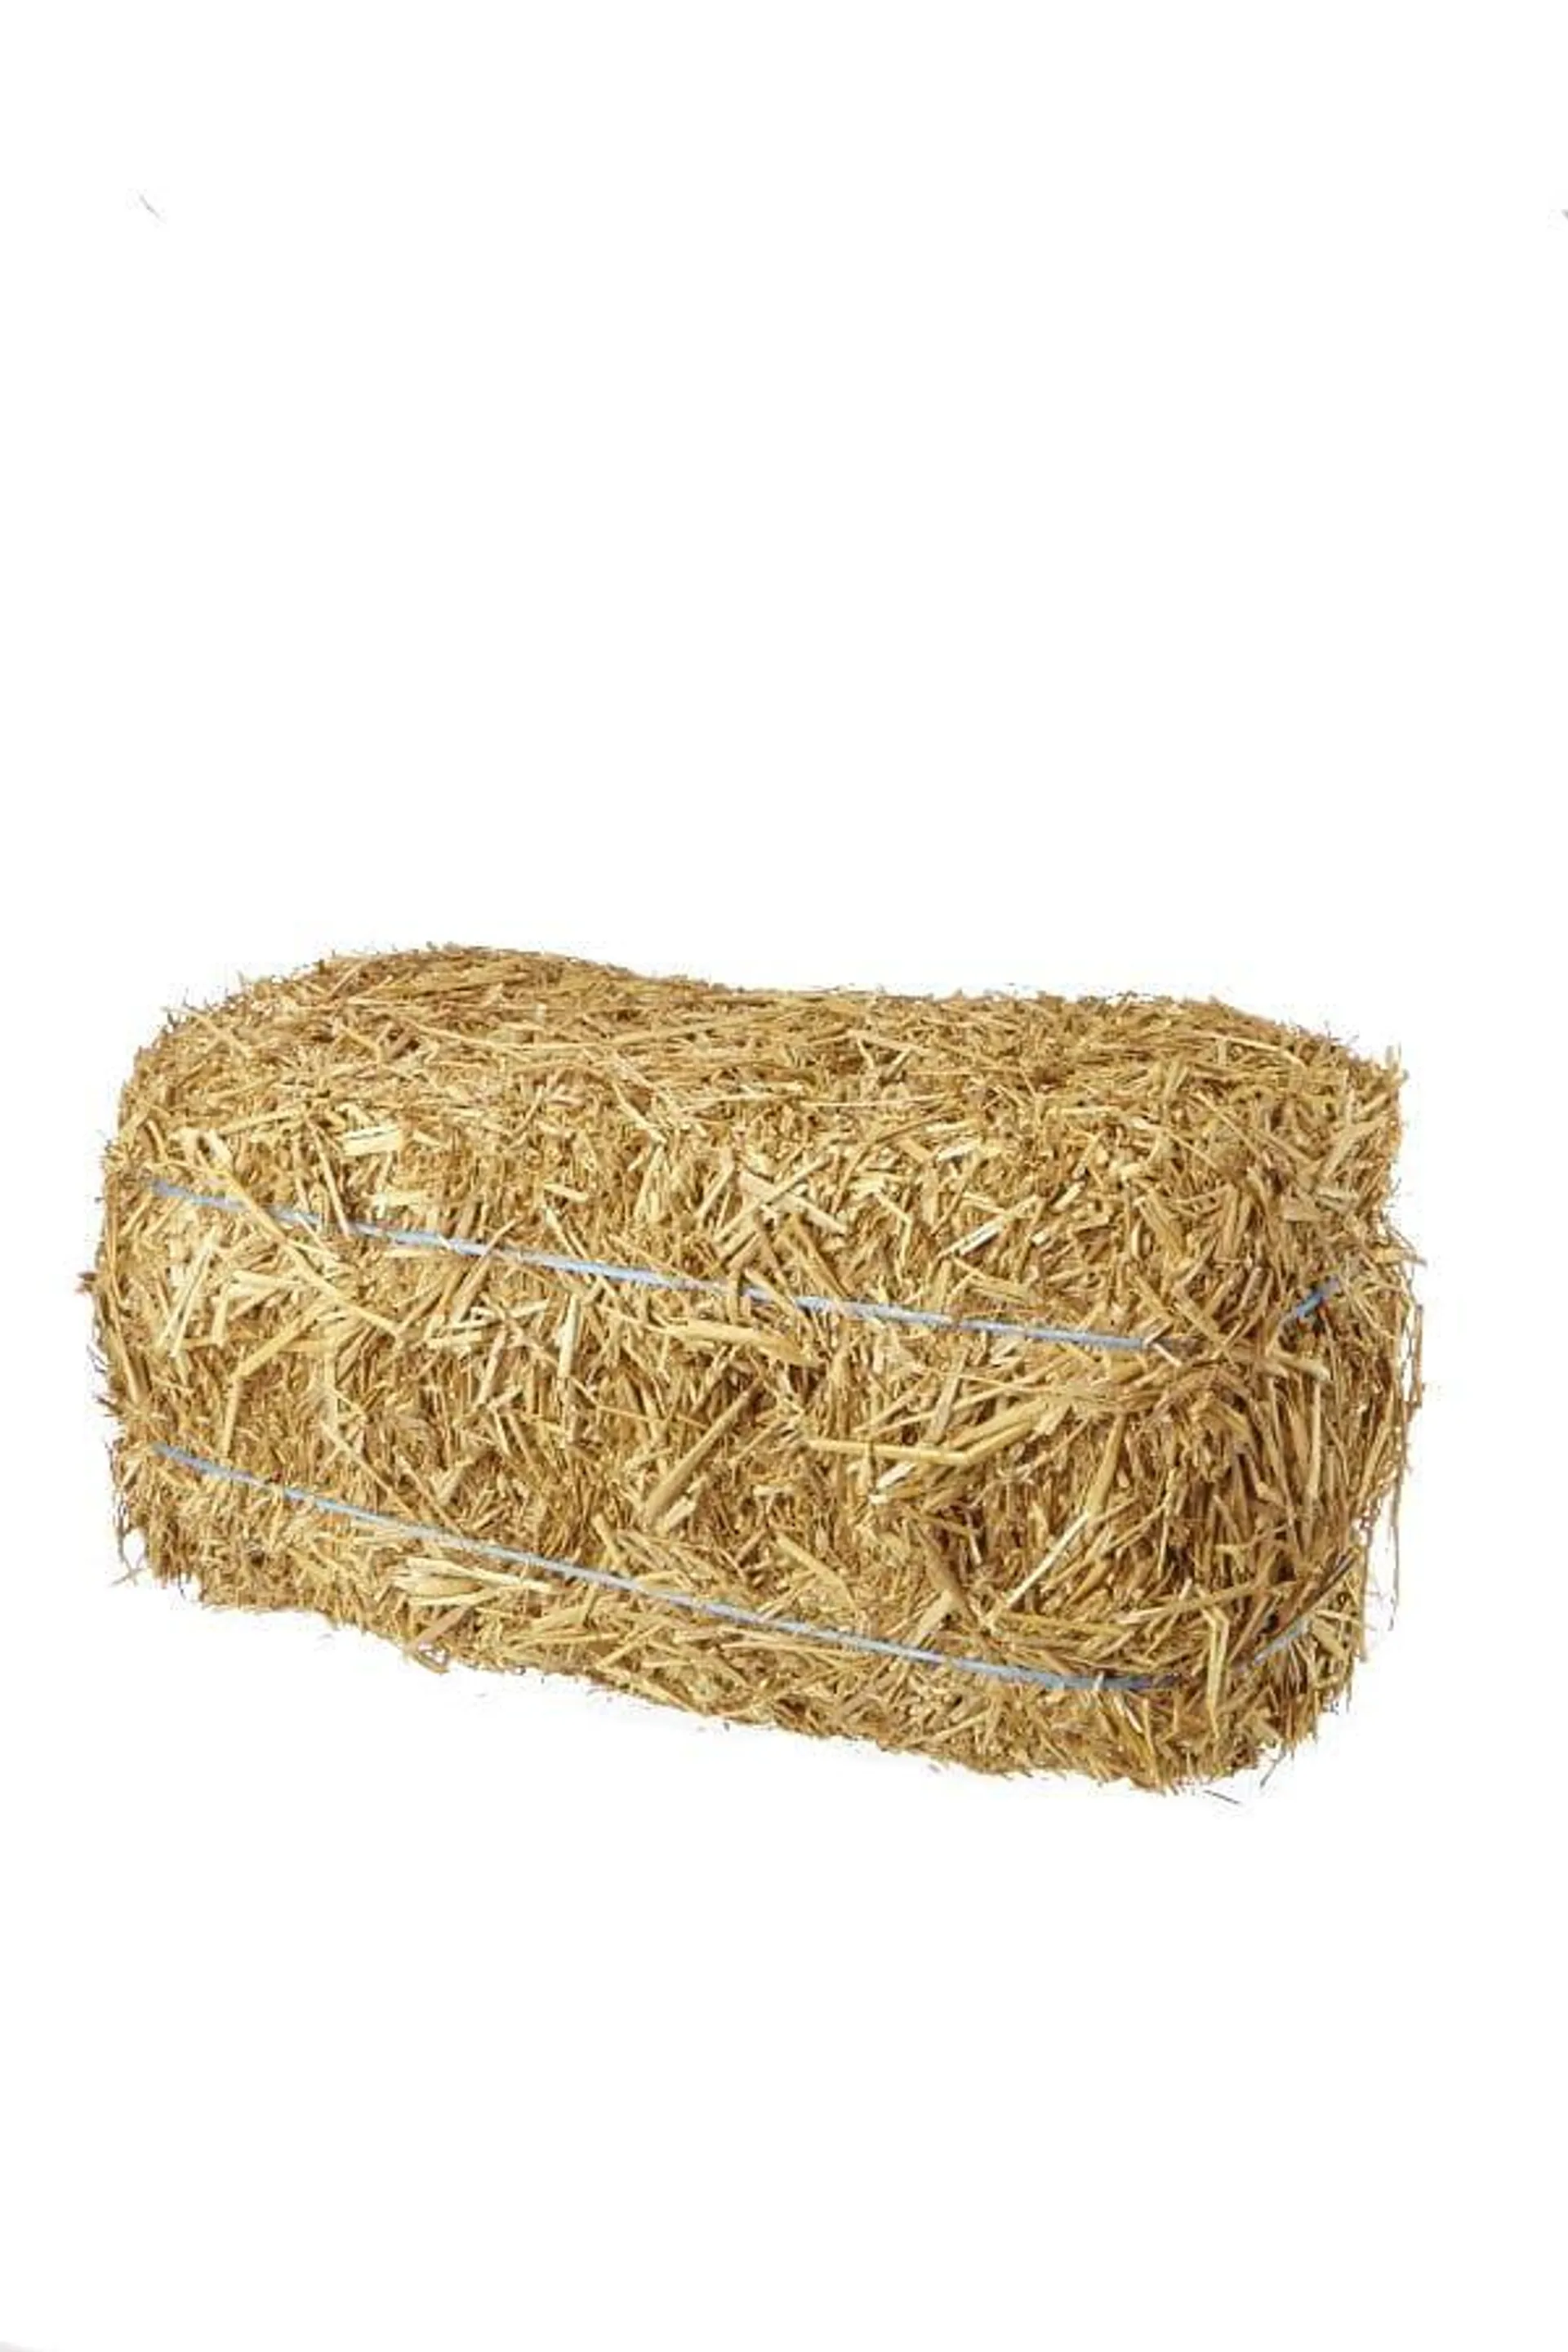 Large Bale of Hay, Beige, 9-in, Indoor/Outdoor Decoration for Fall